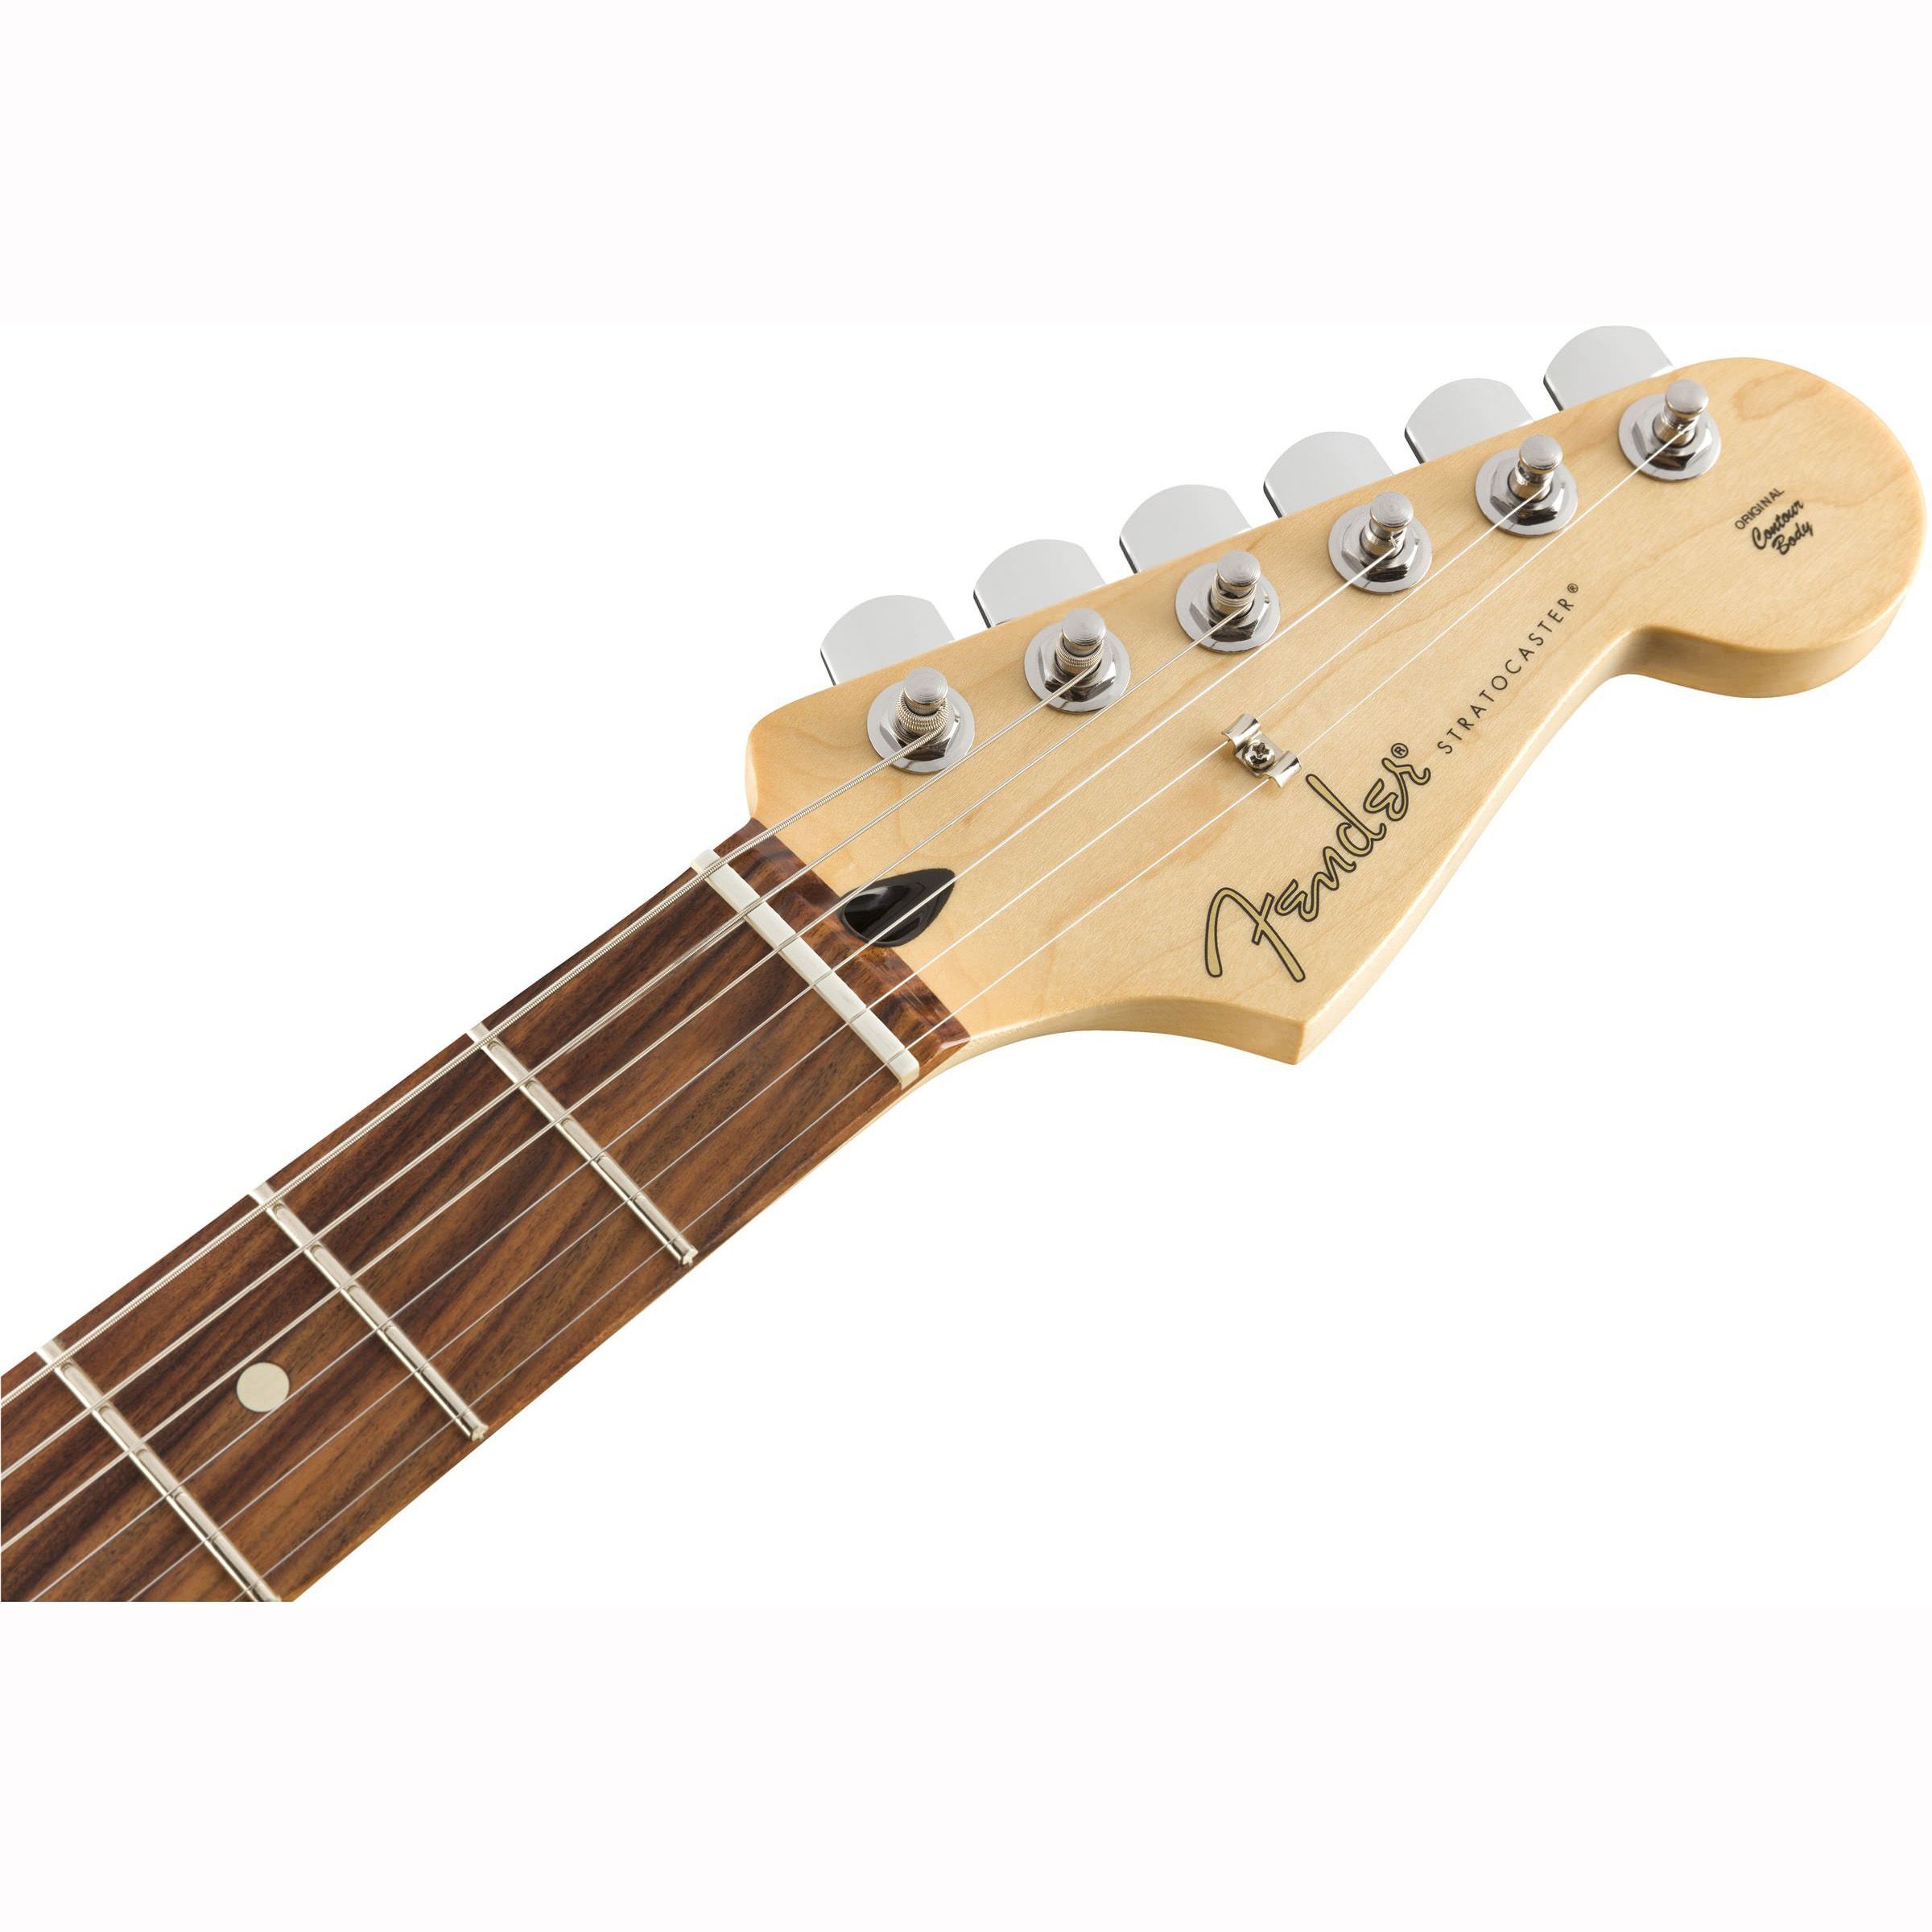 Squier mm stratocaster. Электрогитара Fender Squier. Гитара Fender Squier Stratocaster Affinity. Электрогитара Fender Squier Bullet Strat. Электрогитара Fender Squier Stratocaster.